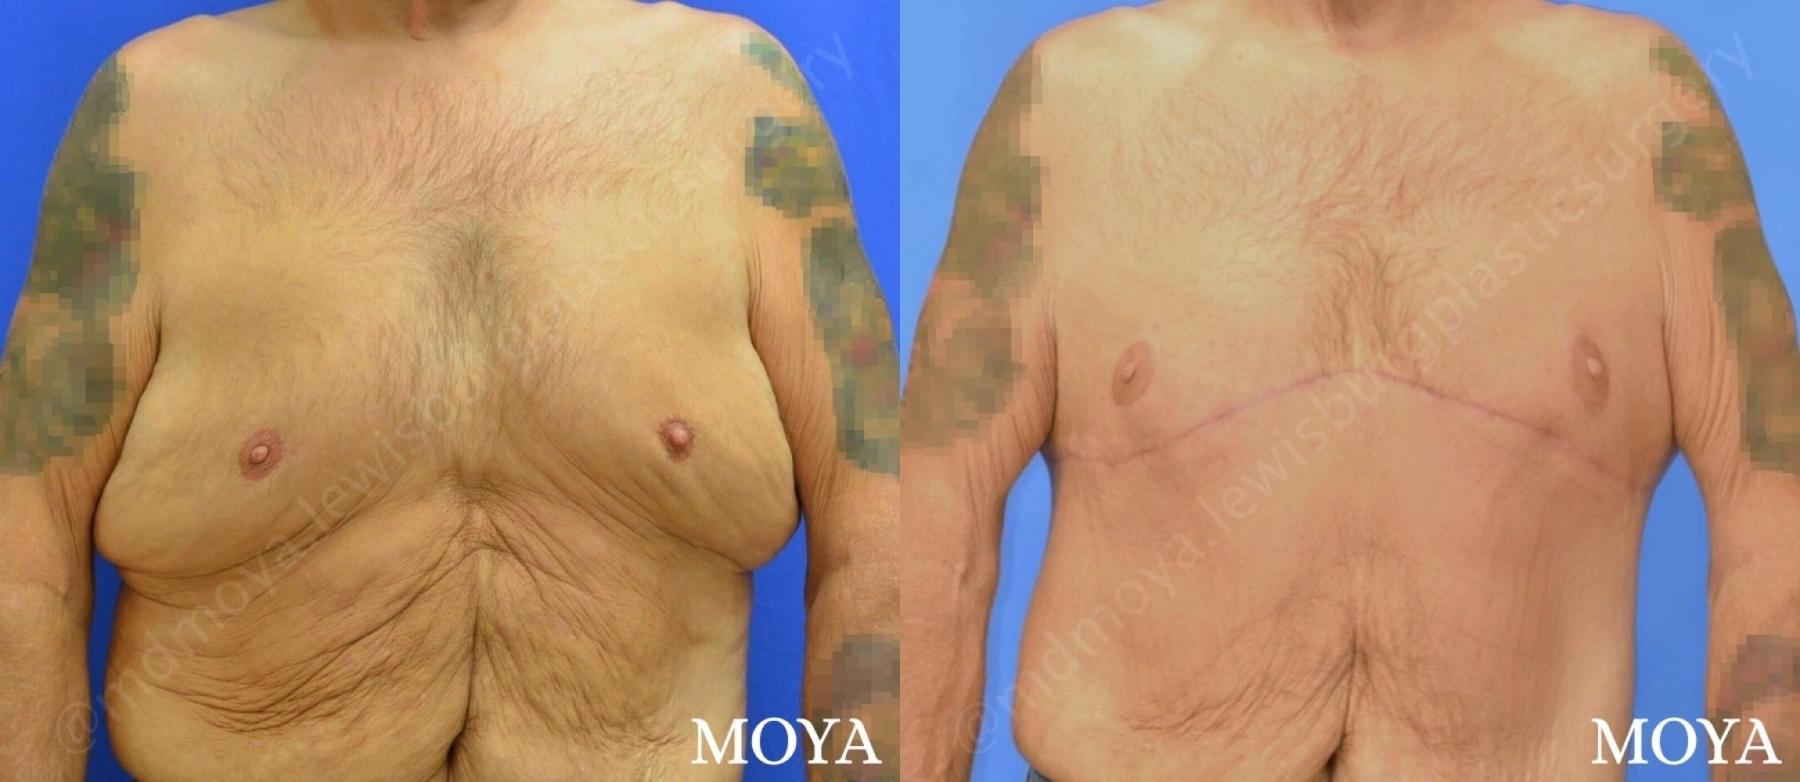 Male Upper Body Lift: Patient 1 - Before and After 1